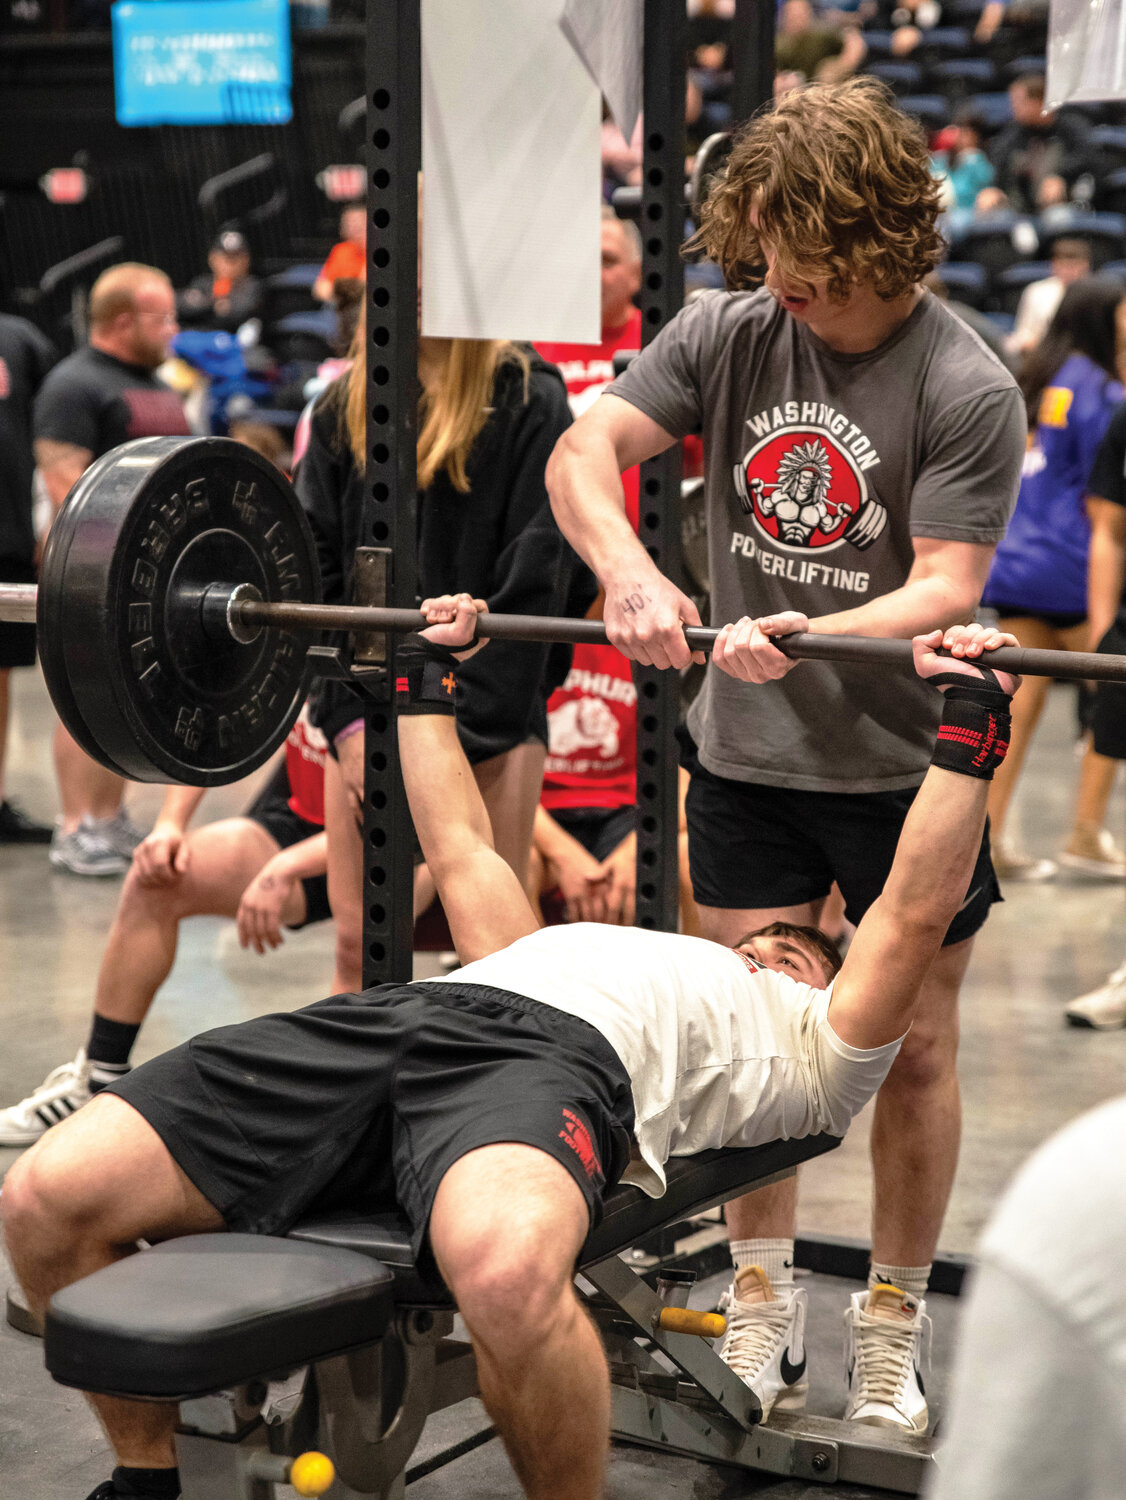 Tanner Olsen spotting teammate Wyatt Wilk at the Bethel Powerlifting meet. Olson was first individually. As a team, Washington finished second.